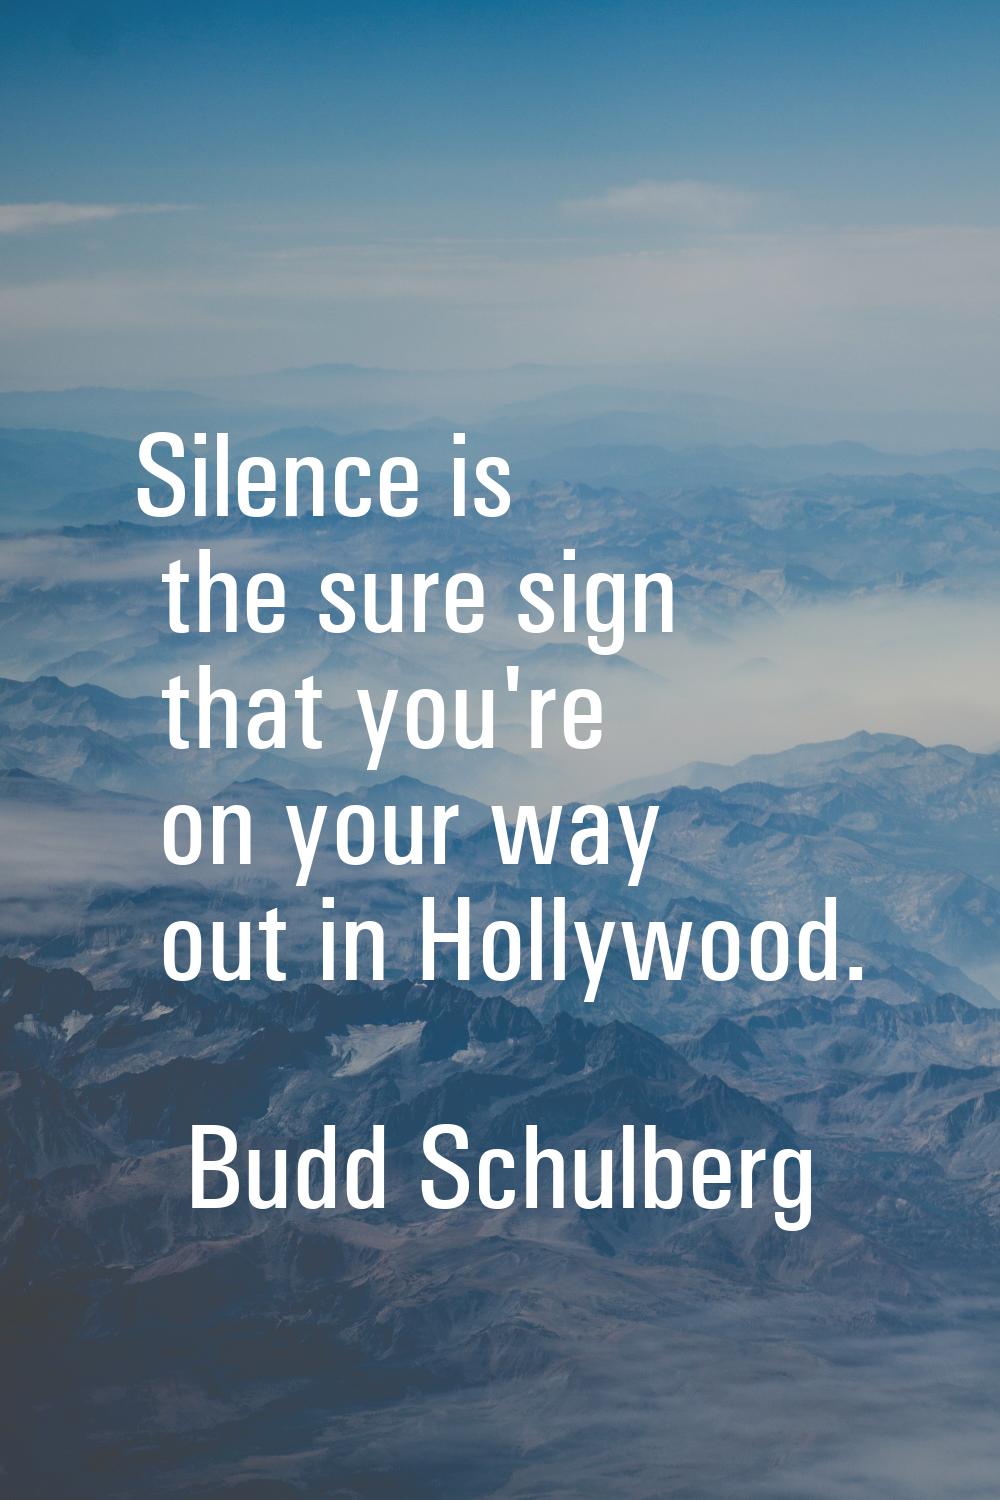 Silence is the sure sign that you're on your way out in Hollywood.